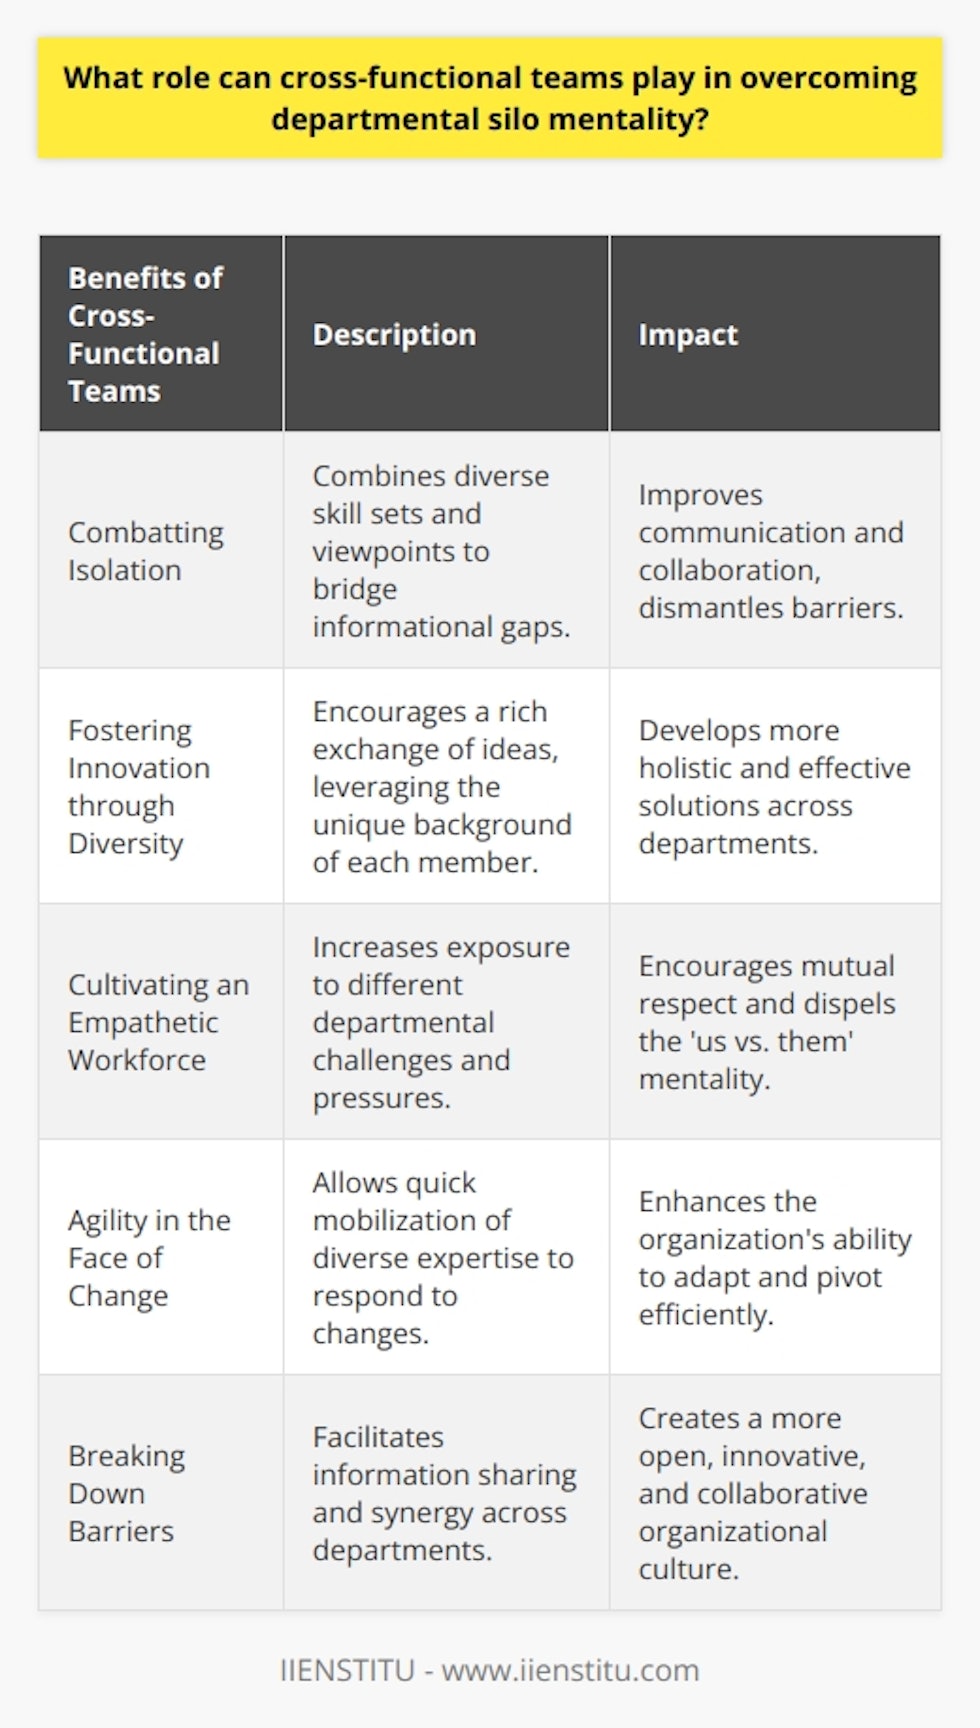 Cross-functional teams stand as a crucial element in disrupting the entrenched patterns of departmental silo mentality, paving the way for a more interconnected and collaborative organizational culture. A silo mentality occurs when departments or groups within an organization do not want to share information or knowledge with other individuals in the same company. This attitude can lead to a decline in efficiency and morale, and hinder overall business performance.Combatting IsolationAt the heart of cross-functional teams is the fundamental principle of bringing together diverse skill sets and viewpoints. When professionals from marketing, finance, HR, IT, and other disciplines unite to work on a common project, they bridge the informational chasms that typically arise in siloed environments. This interaction naturally dismantles barriers, as members must communicate and collaborate to reach their shared goals.Fostering Innovation through DiversityA diverse team structure is fertile ground for innovation. Cross-functional teams allow for a rich exchange of ideas, where the unique background of each member contributes to a wider understanding of the problem-solving process. For instance, when marketing experts understand the complexities of product development, or engineers gain insight into customer service challenges, the solutions they collectively develop are often more holistic and effective.Cultivating an Empathetic WorkforceWorking in a cross-functional team enhances empathy across the organizational spectrum. Employees are exposed to the obstacles and pressures faced by their colleagues in other departments. This shared experience disperses the 'us vs. them' mentality and builds a more cohesive company culture where mutual respect is the norm.Agility in the Face of ChangeOrganizational agility — the ability to quickly adapt to market changes and new business opportunities — is significantly amplified by the use of cross-functional teams. These teams can quickly mobilize diverse expertise to pivot and respond to external pressures, a process that siloed departments might find cumbersome.In essence, cross-functional teams are a dynamic antidote to the static world of departmental silos. They bring together a broad spectrum of knowledge, skills, and experiences that enrich the decision-making process and propel organizations towards a more open, innovative, and collaborative future. Through these teams, organizations can not only break down barriers between departments to share vital information but also create new levels of synergy that may have been previously unattainable in a siloed structure.